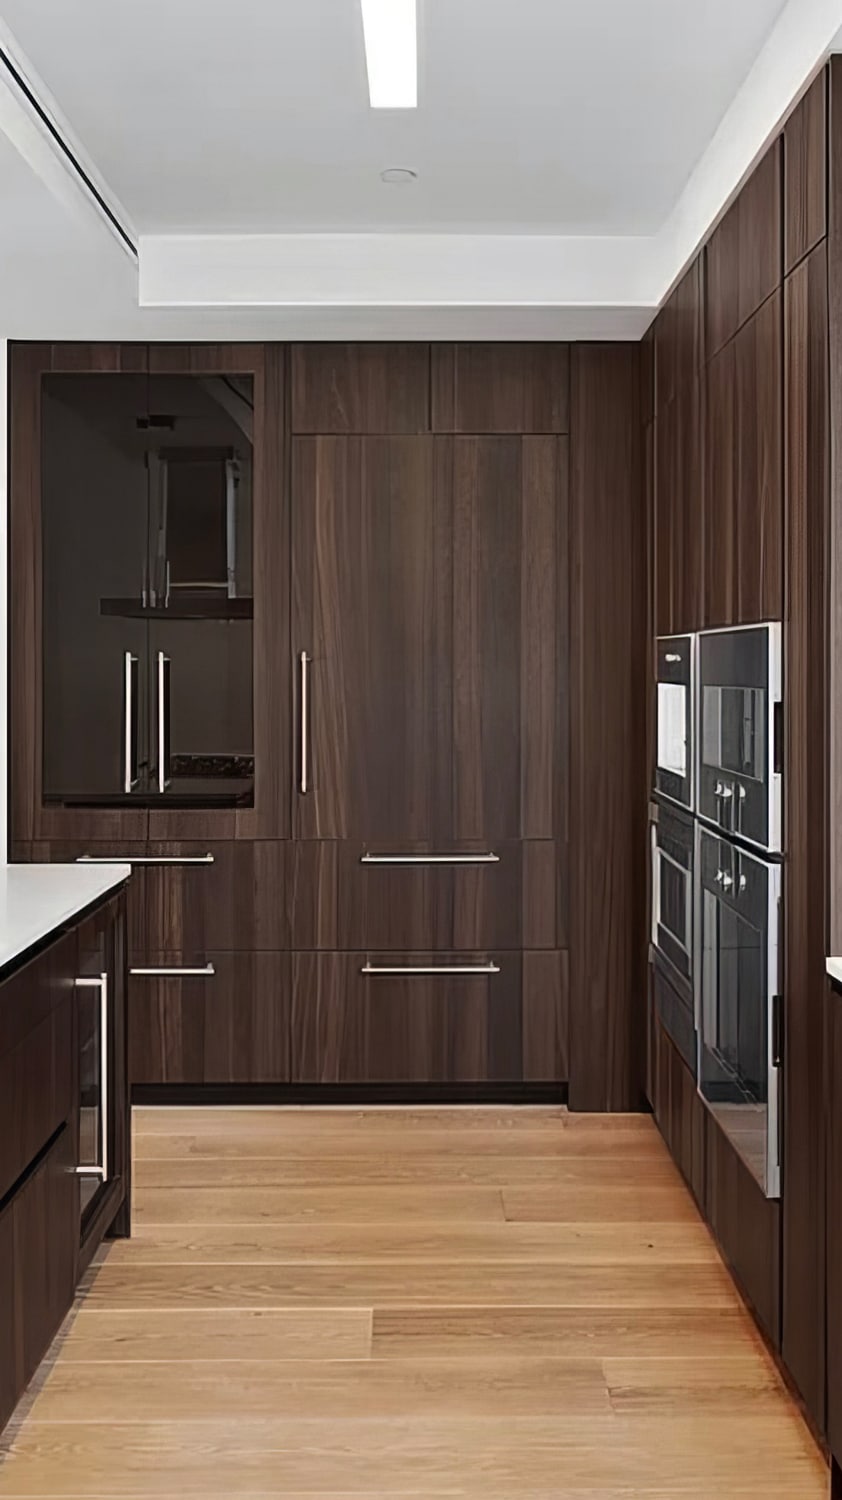 Tribeca New York Penthouse. MandiCasa YOTA Kitchen cabinetry in Thermo Oak finish. No chemicals or stains required to achieve this natural finish. Designed by Lorena Polon, Senior Design Consultant of MandiCasa New York.